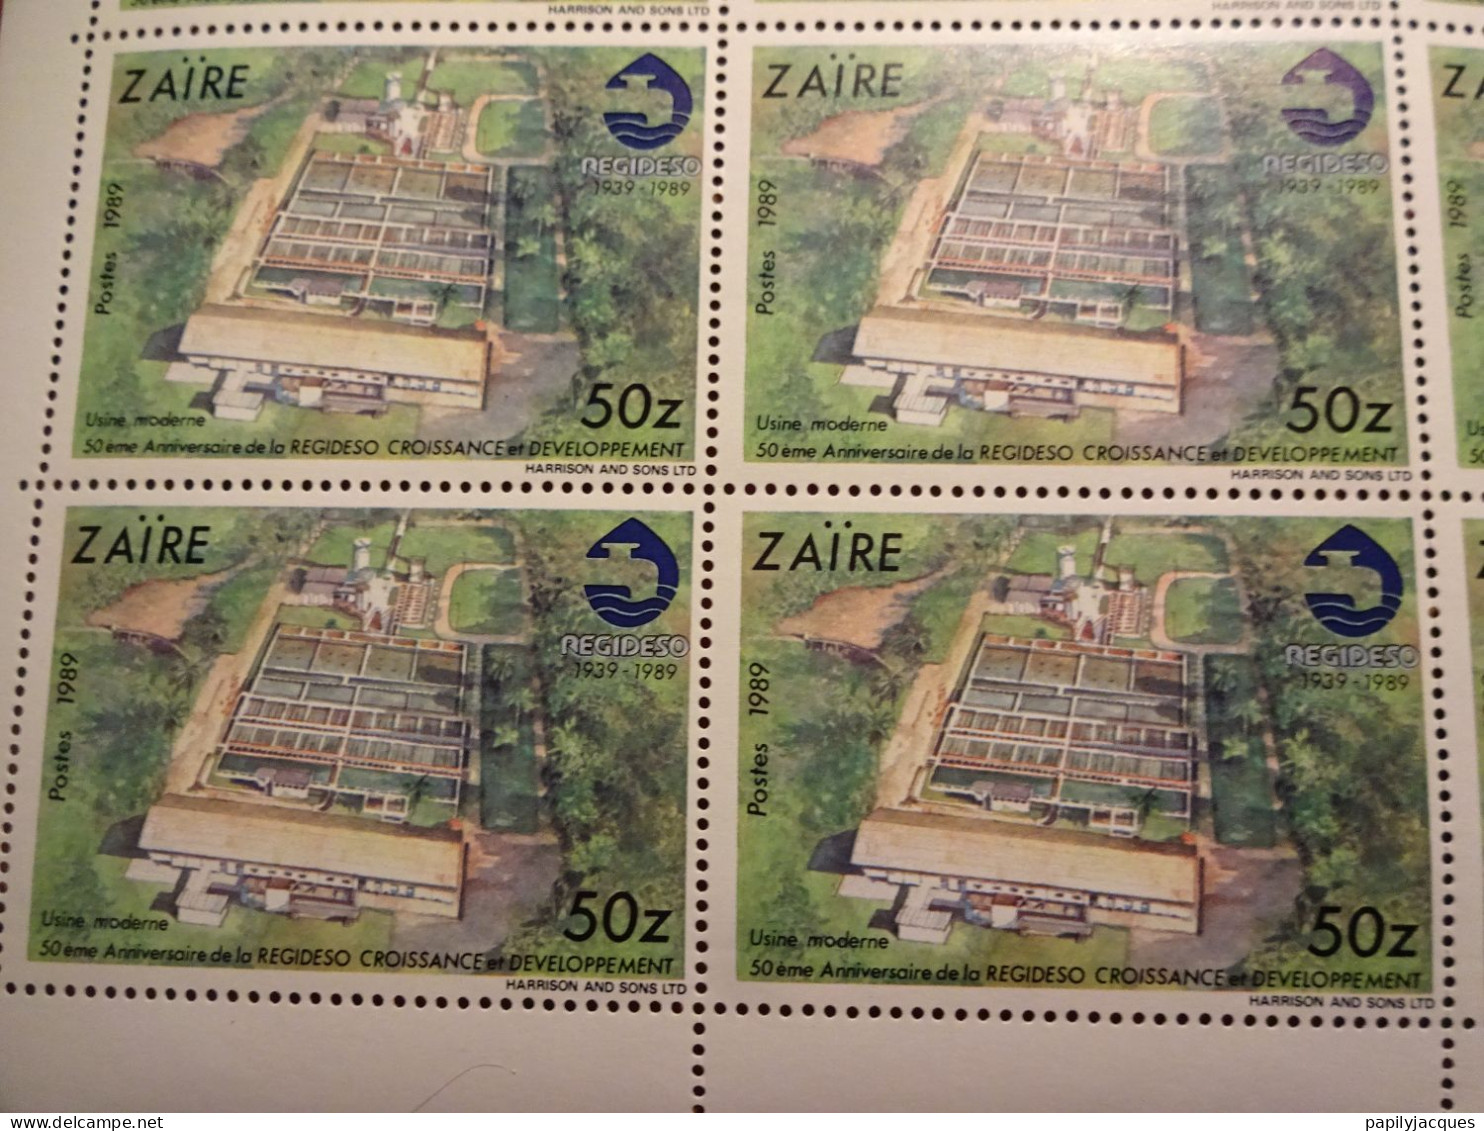 Zaire 1989 Usine Moderne 50 Z 20 Timbres Feuille - Unused Stamps